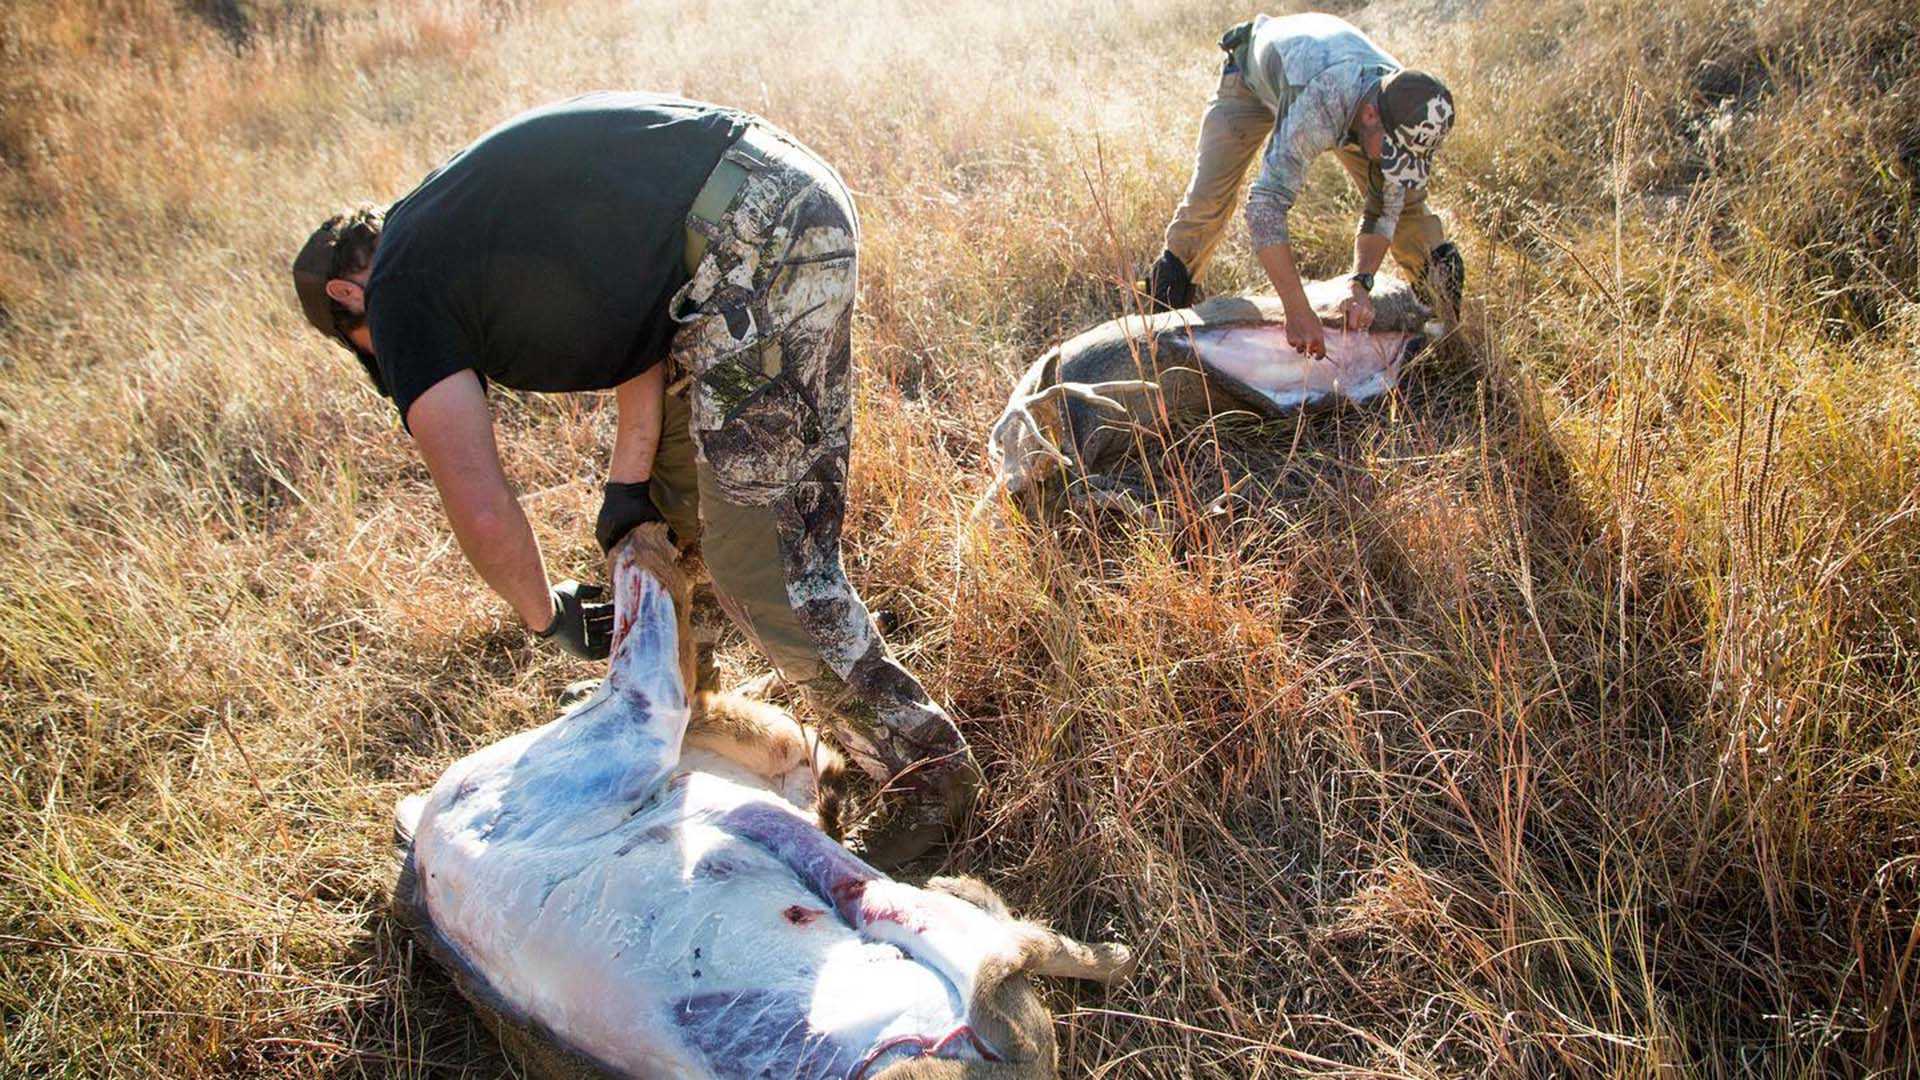 A good skinning knife will do nearly everything a hunter needs when it's time to butcher a deer.